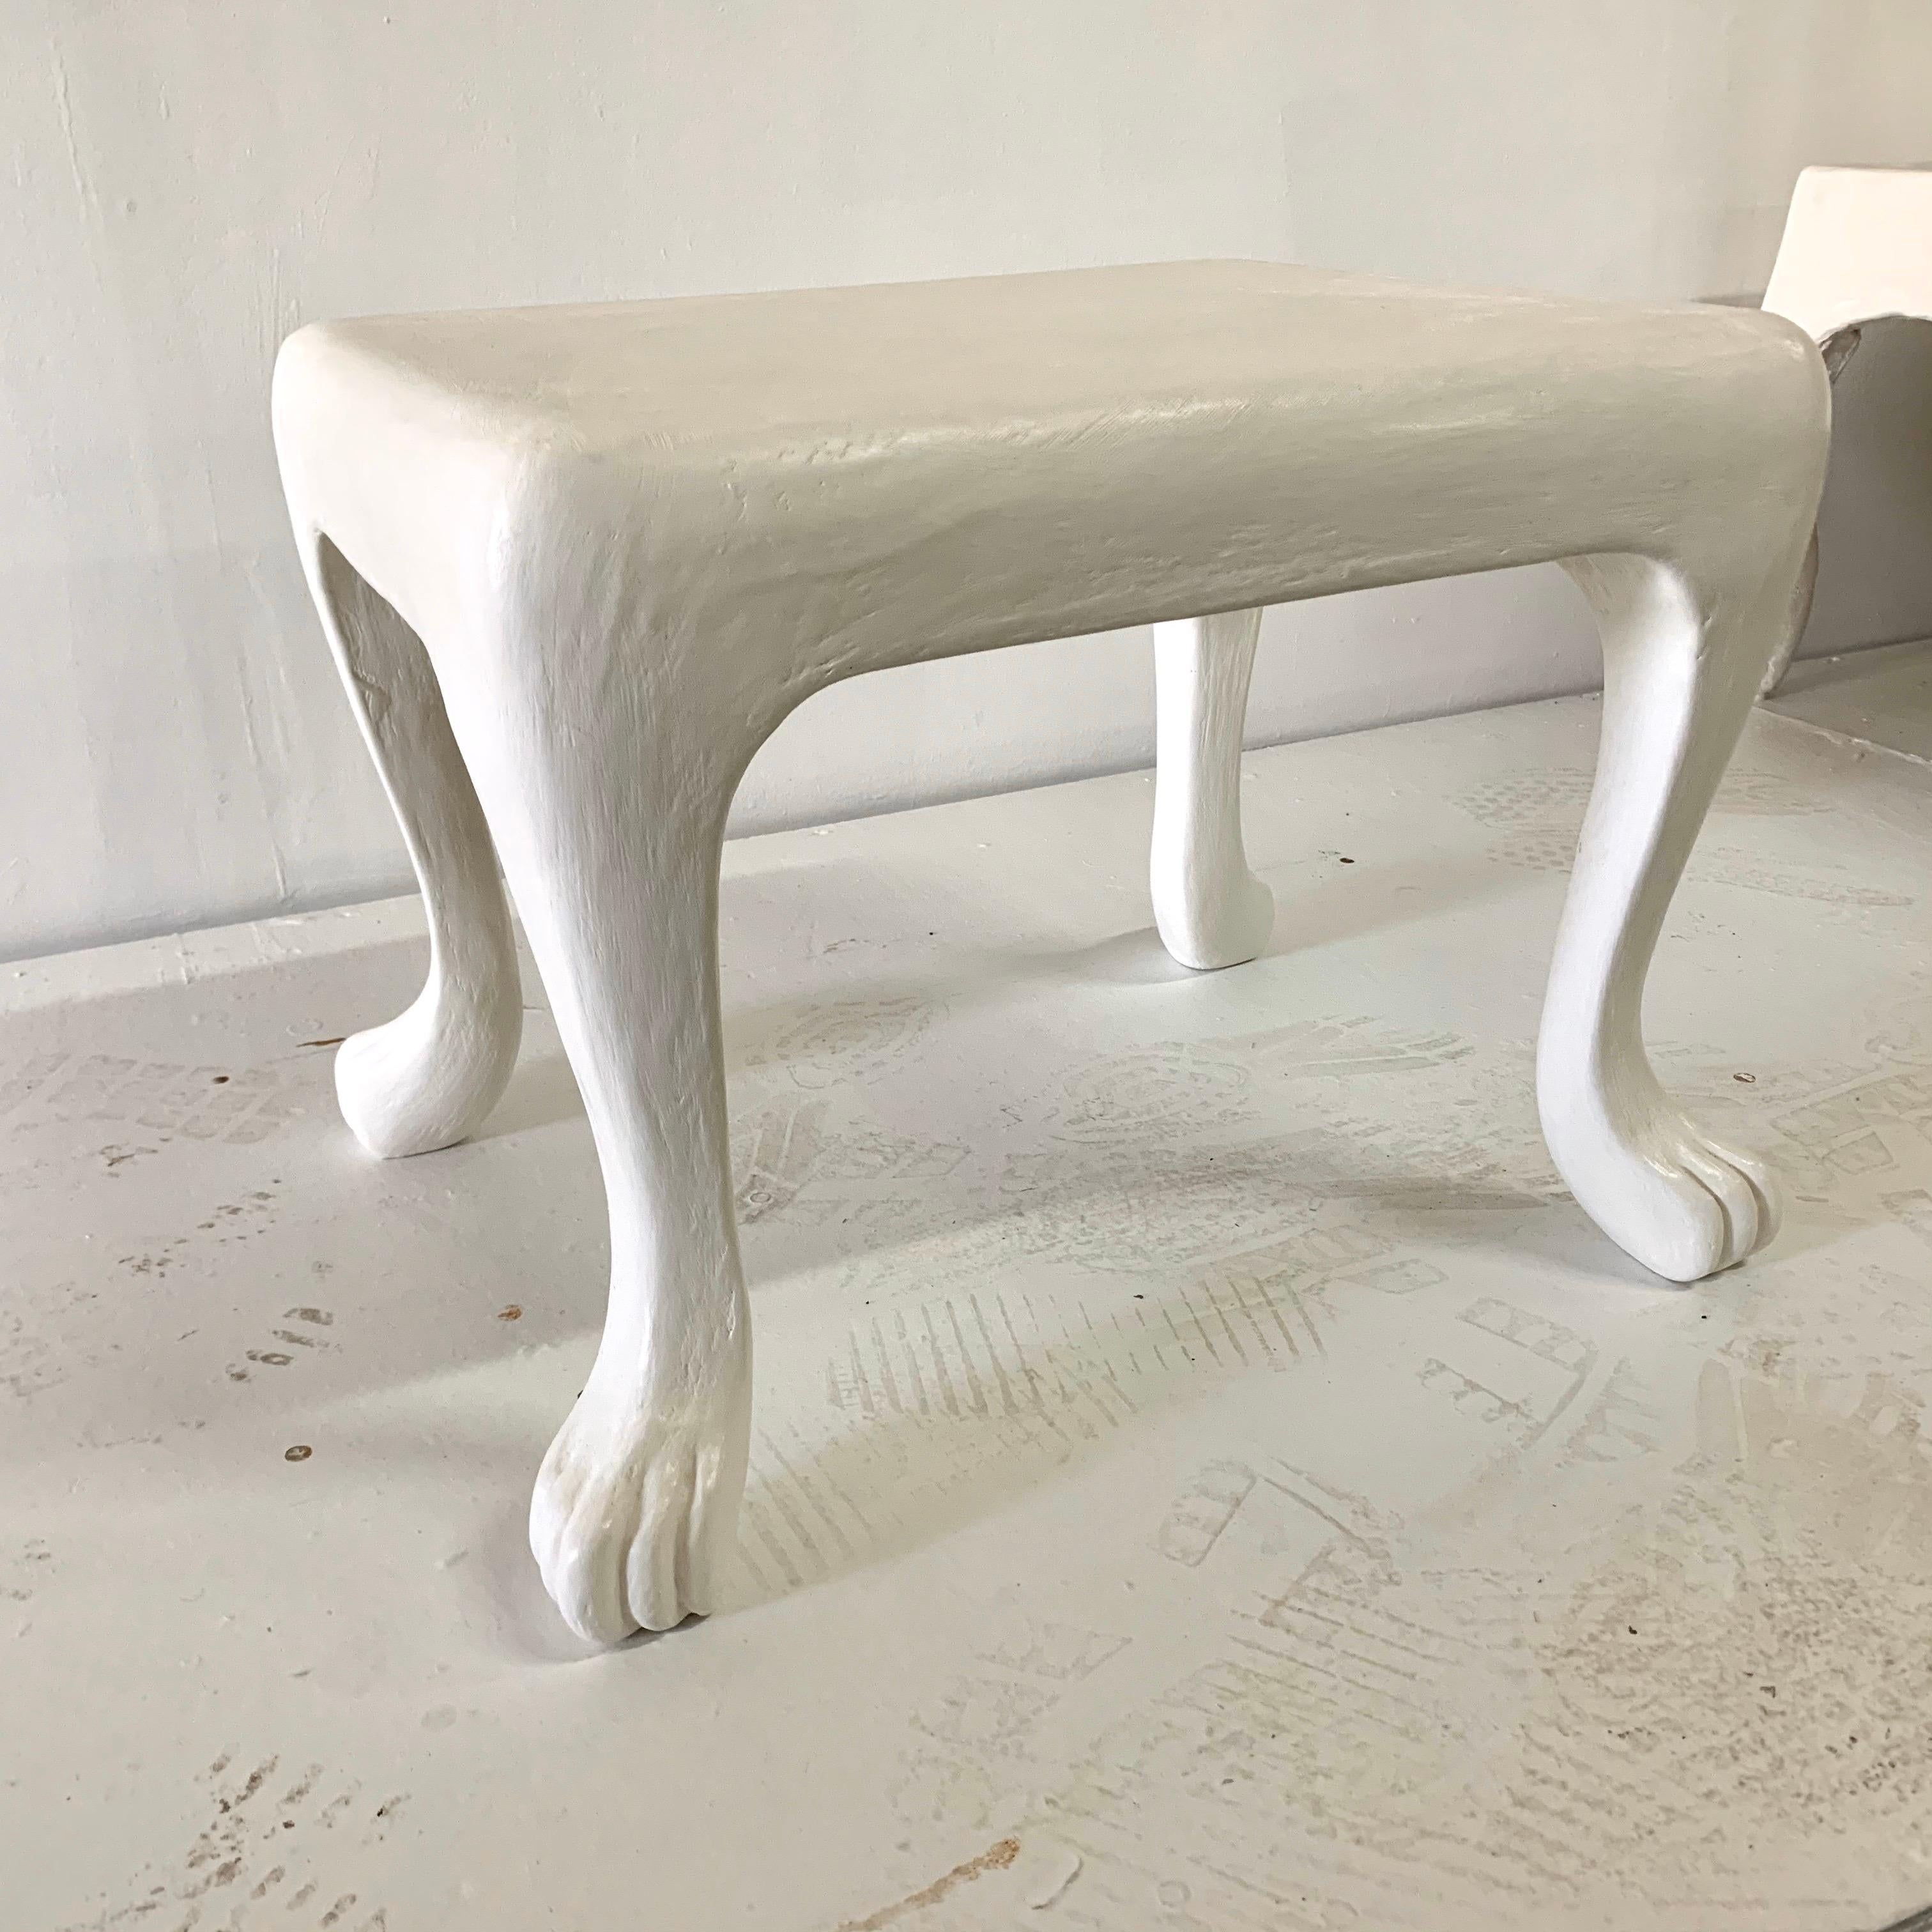 The plaster finish is absolutely lovely and textured on this lions feet base table.